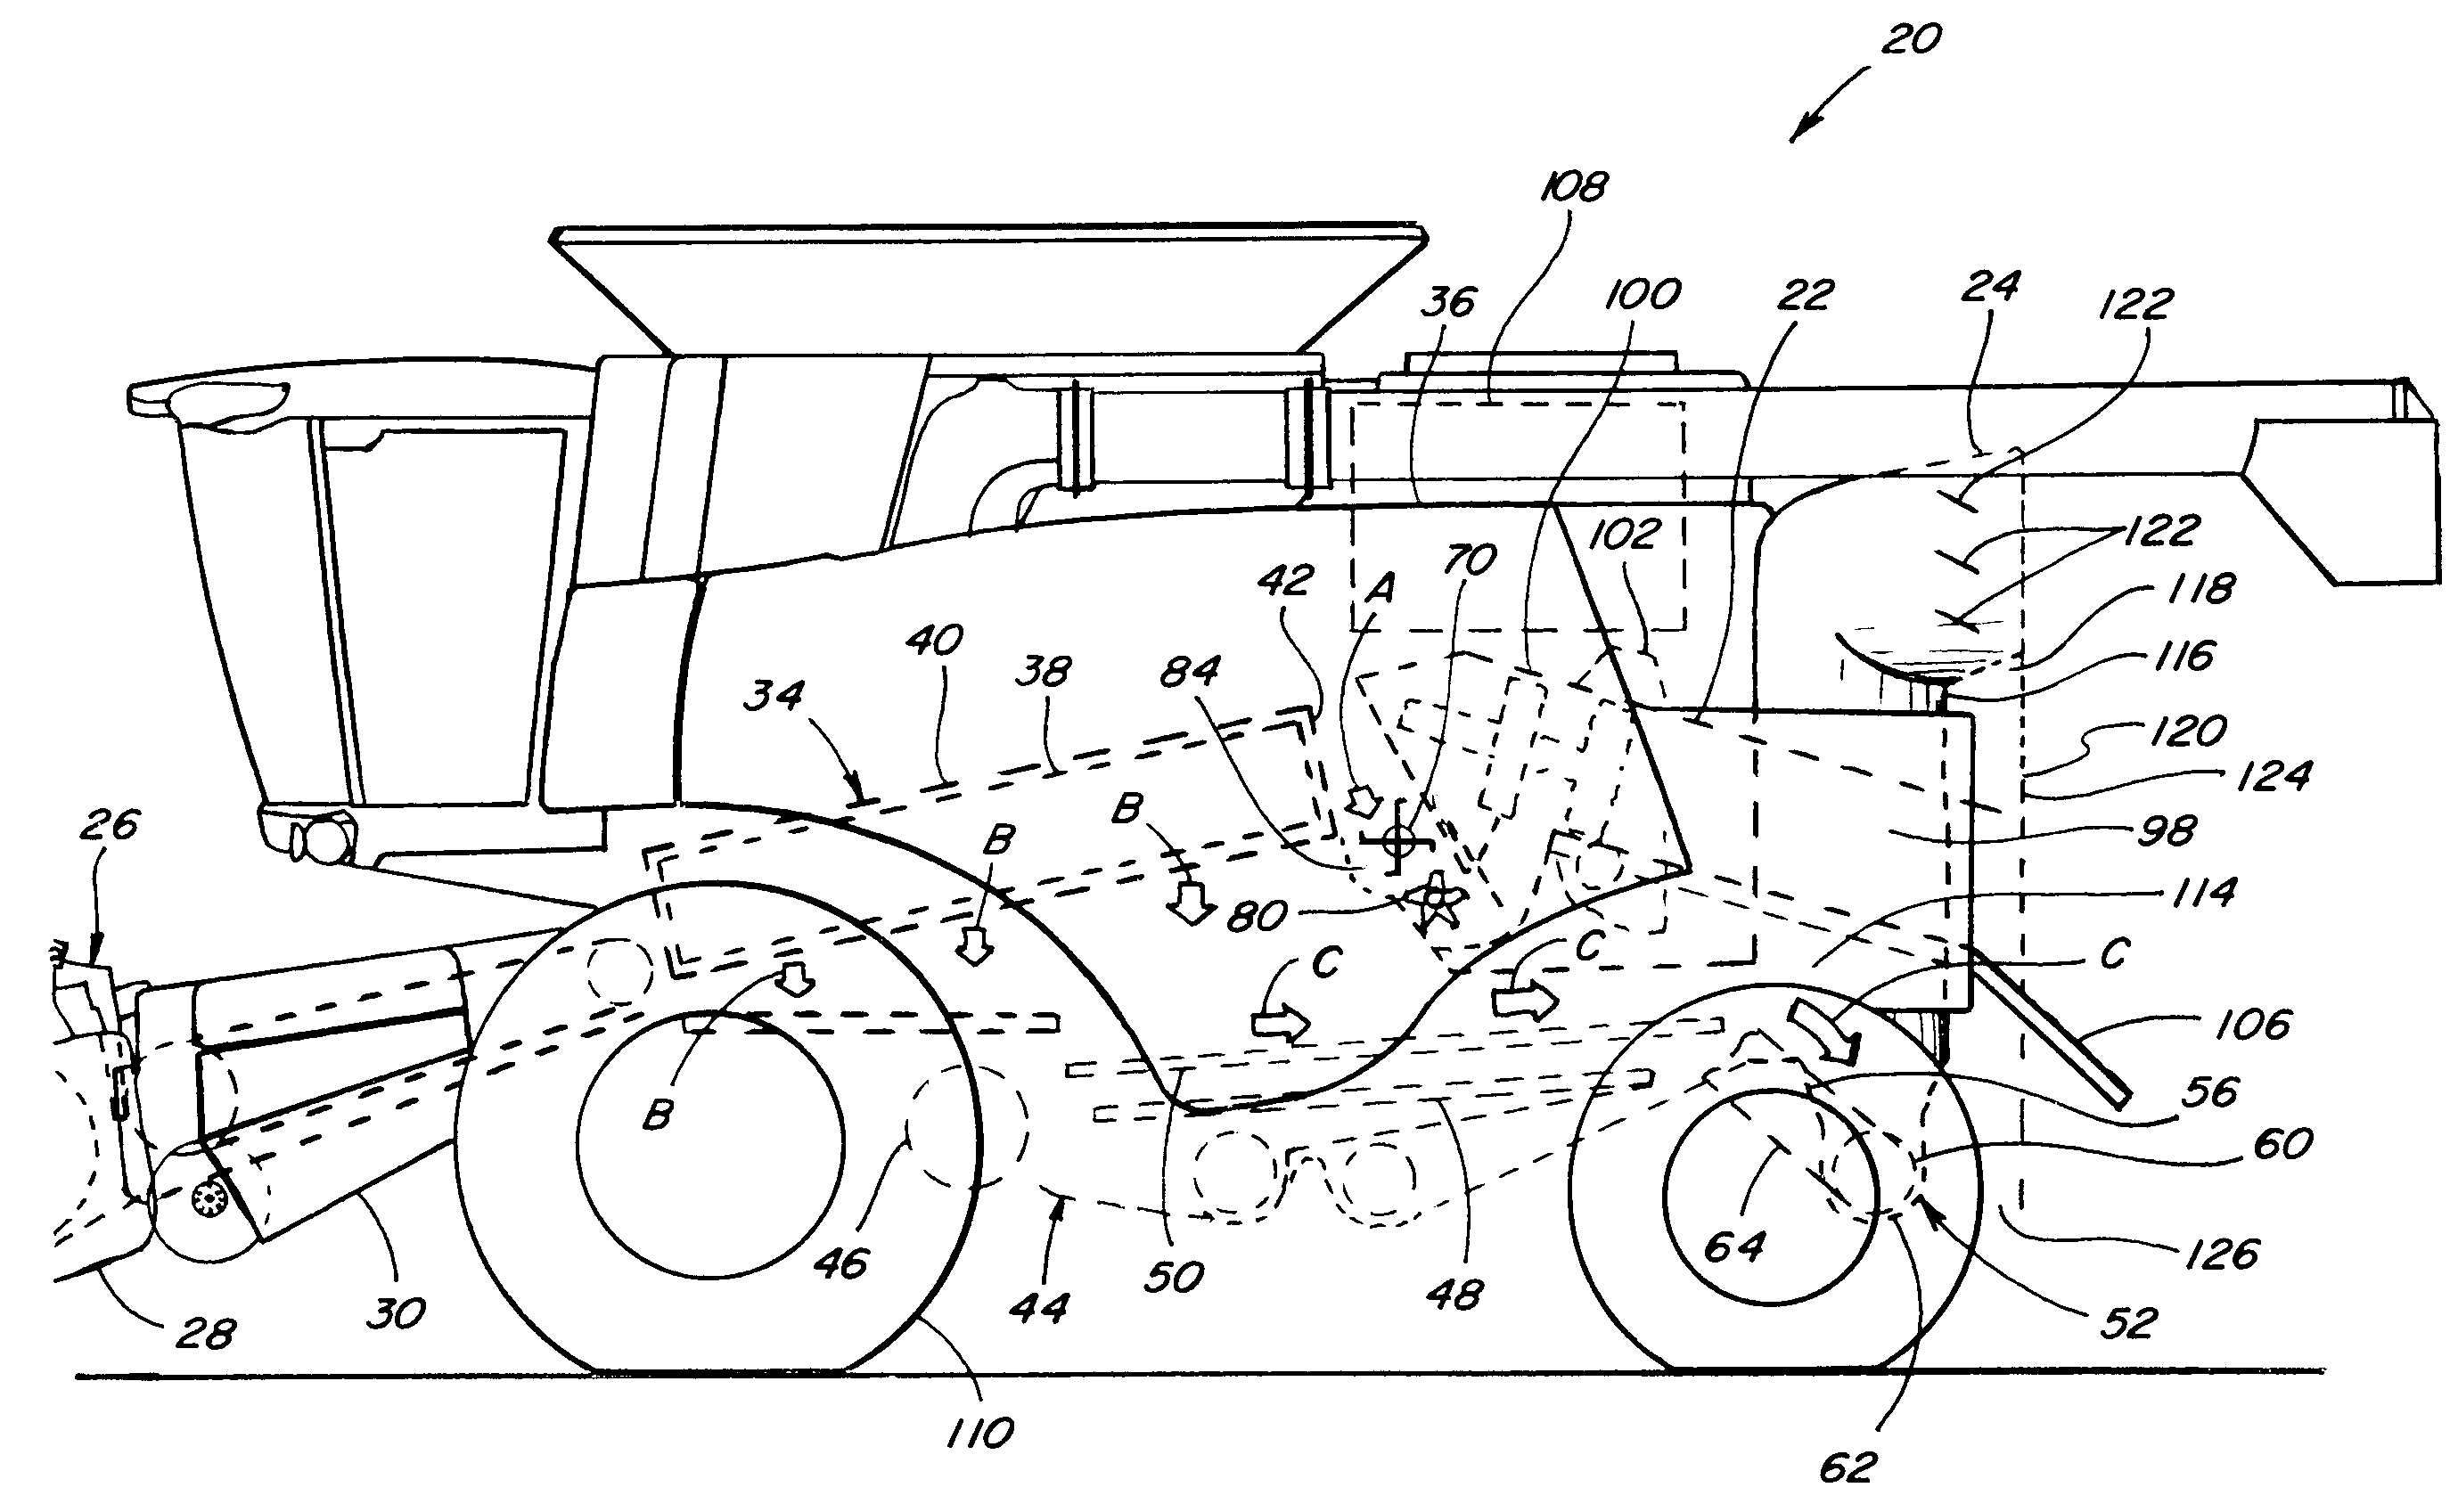 Agricultural combine with on-board baler and dust suppression capability